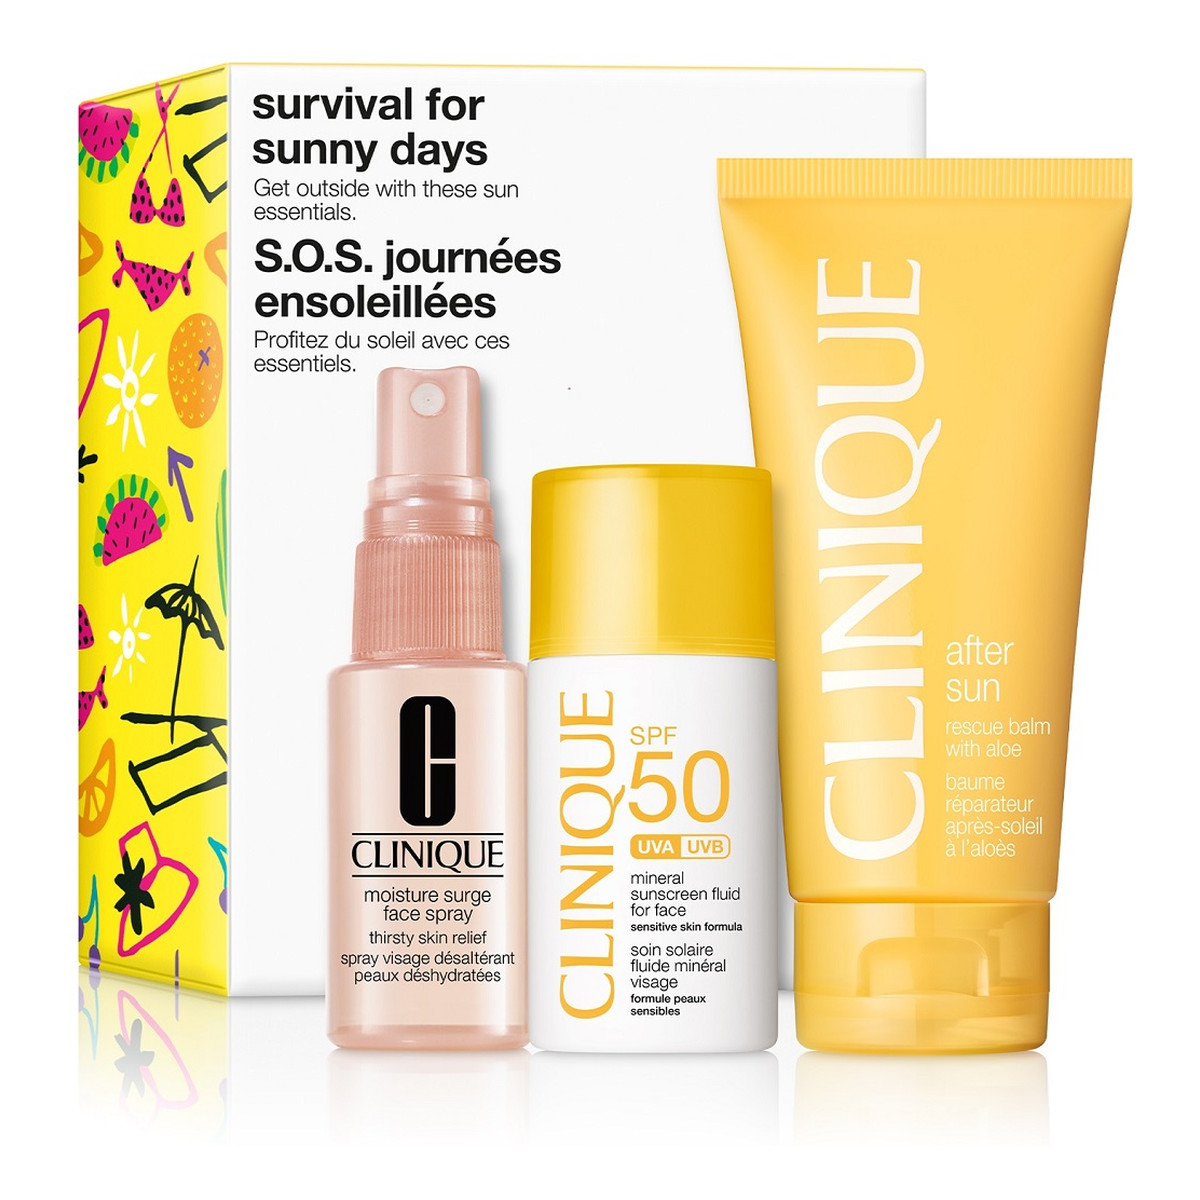 Clinique Survival For Sunny Days zestaw Moisture Surge Face Spray 30ml + SPF50 Mineral Sunscreen Fluid For Face 30ml + After Sun Rescue Balm With Aloe